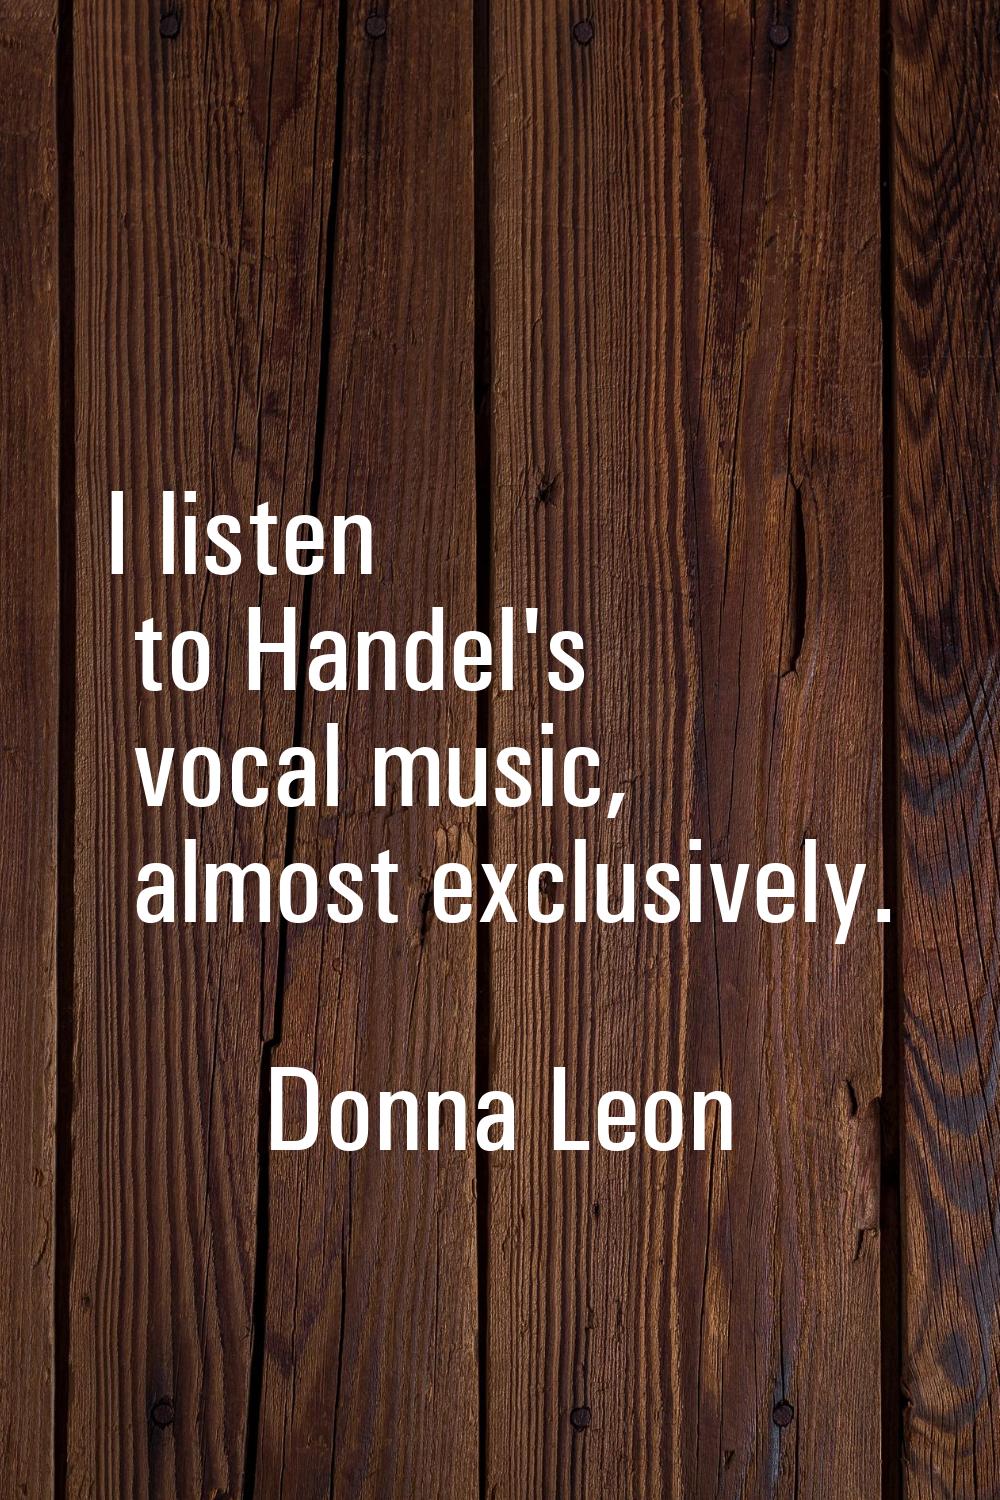 I listen to Handel's vocal music, almost exclusively.